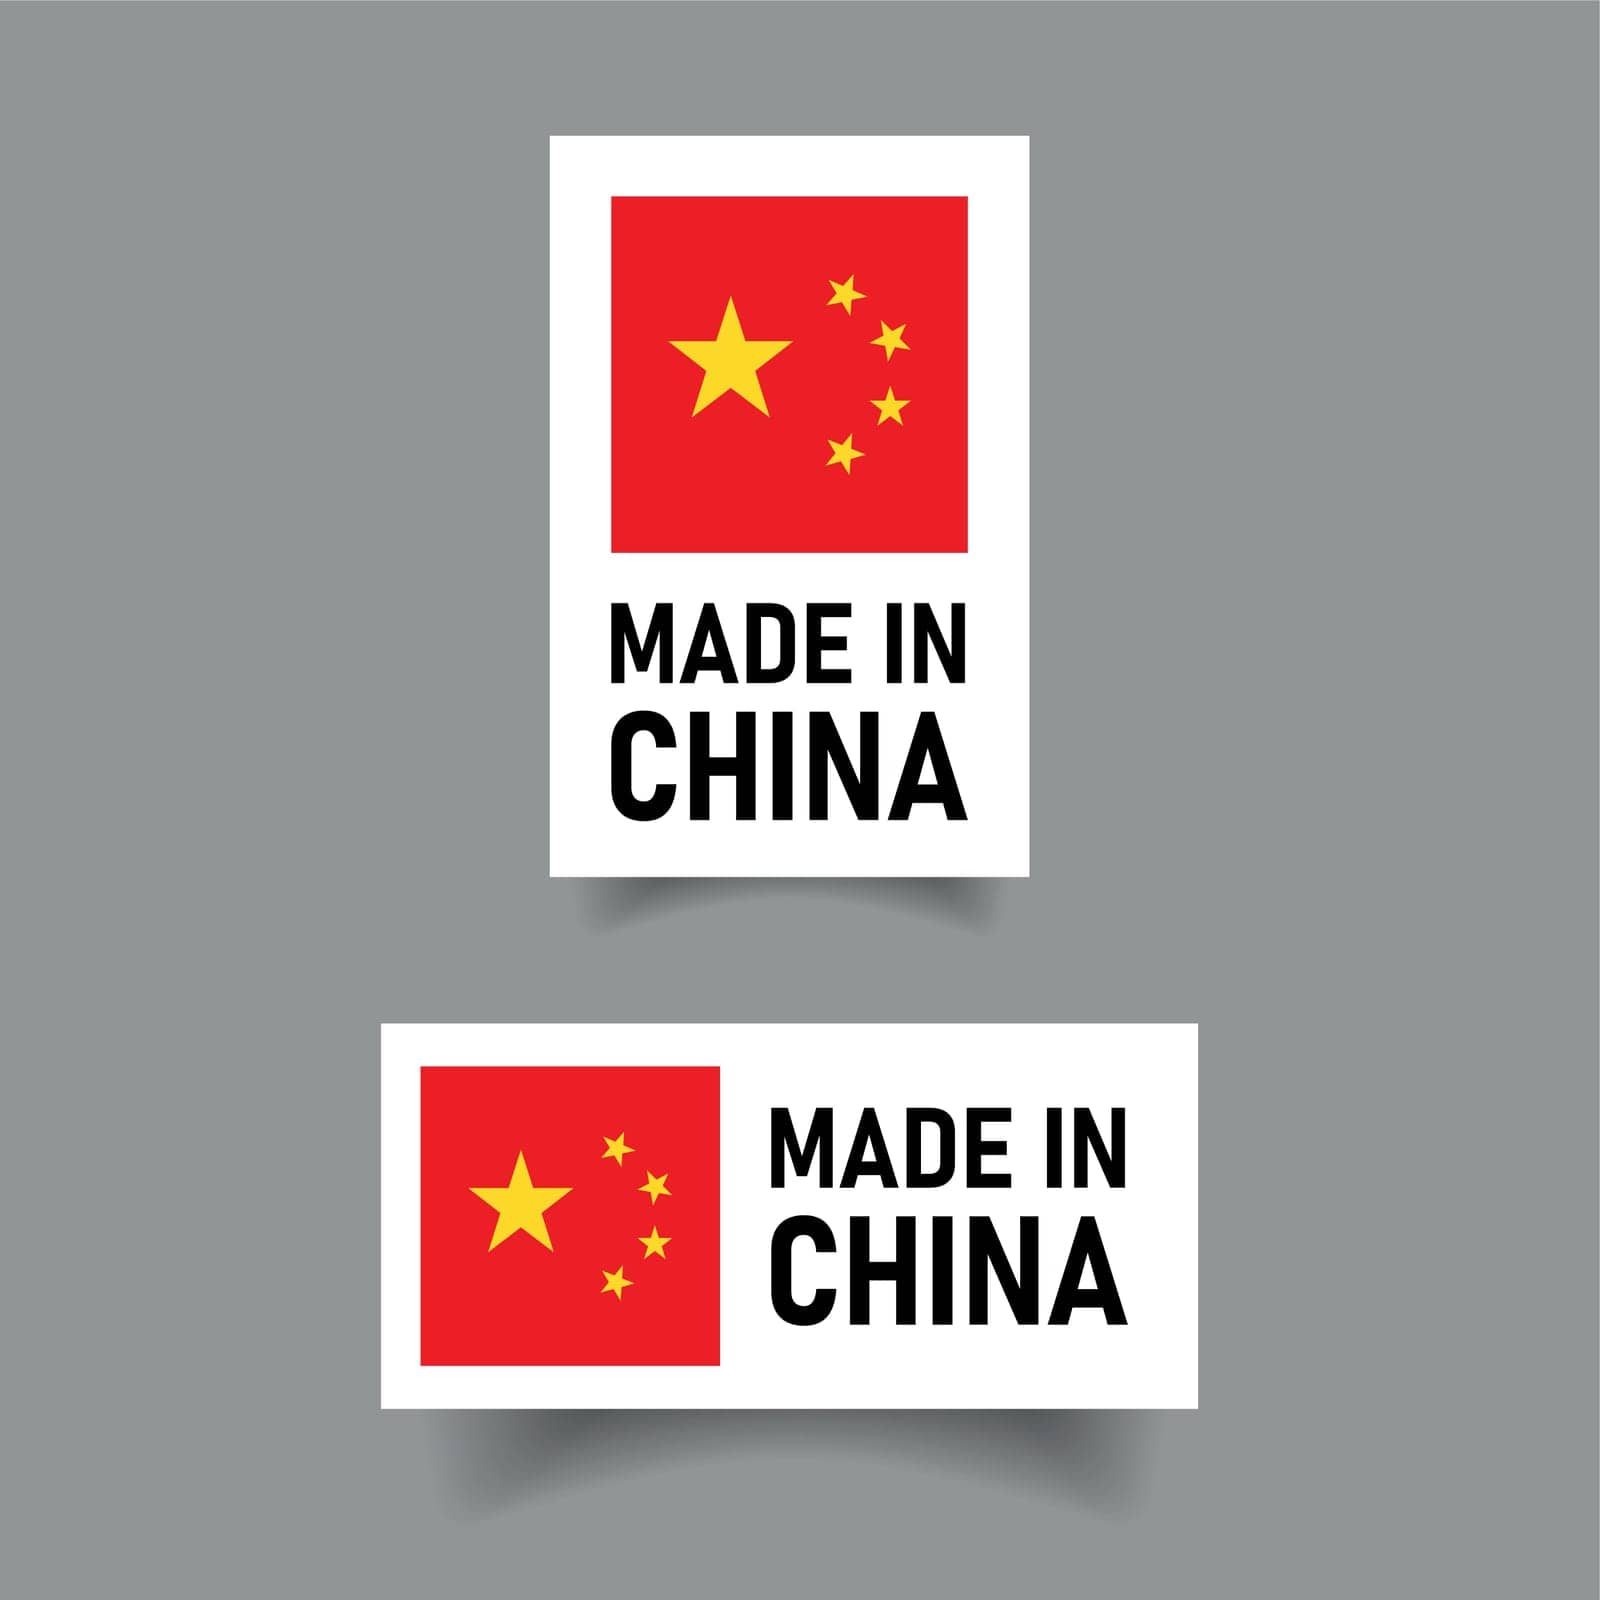 Made in China label set by Nutil